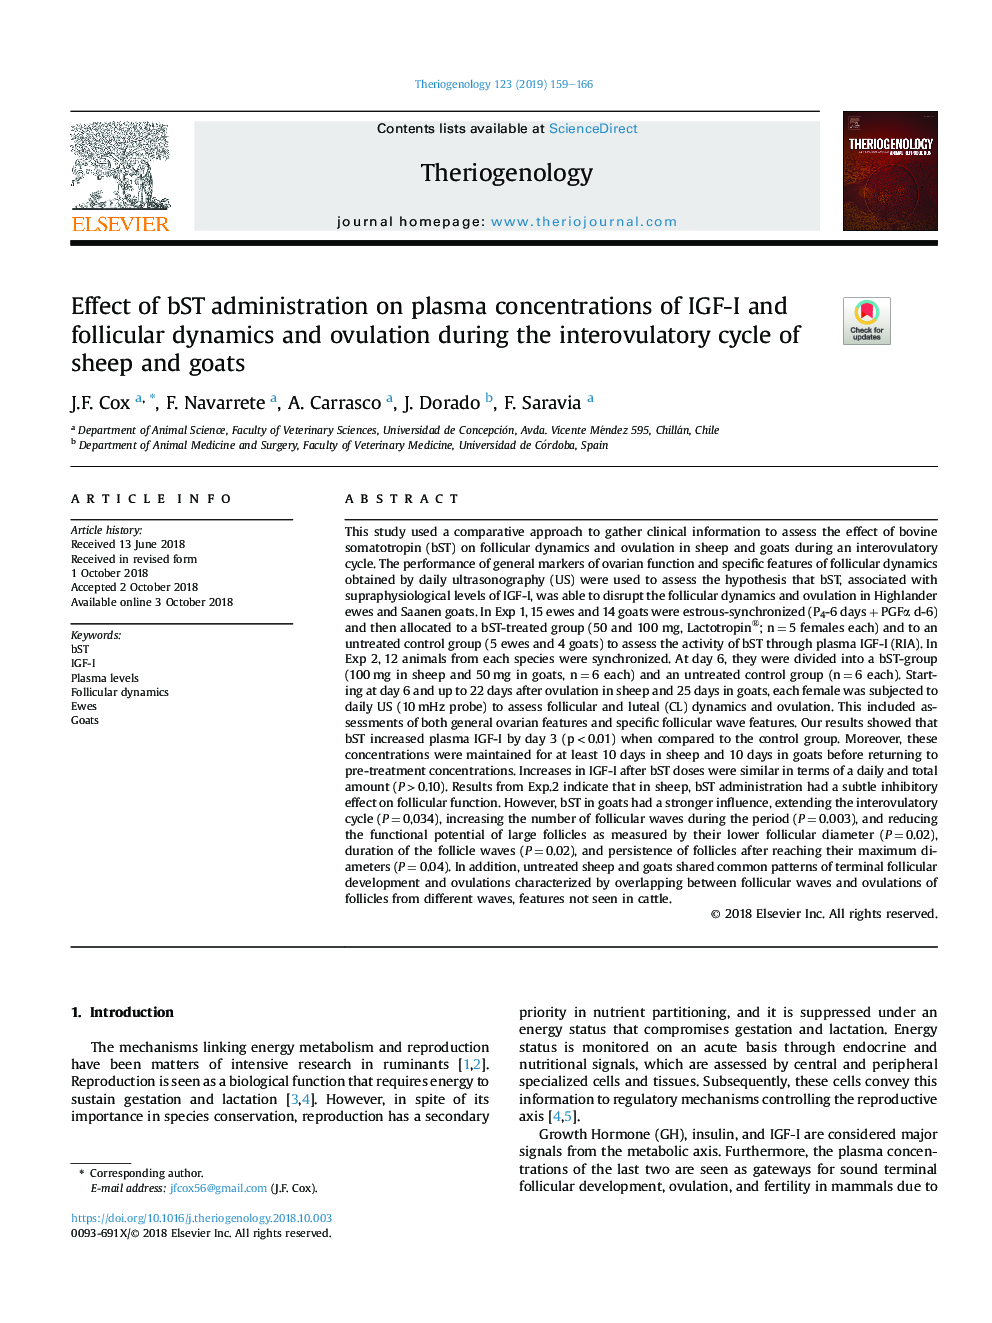 Effect of bST administration on plasma concentrations of IGF-I and follicular dynamics and ovulation during the interovulatory cycle of sheep and goats